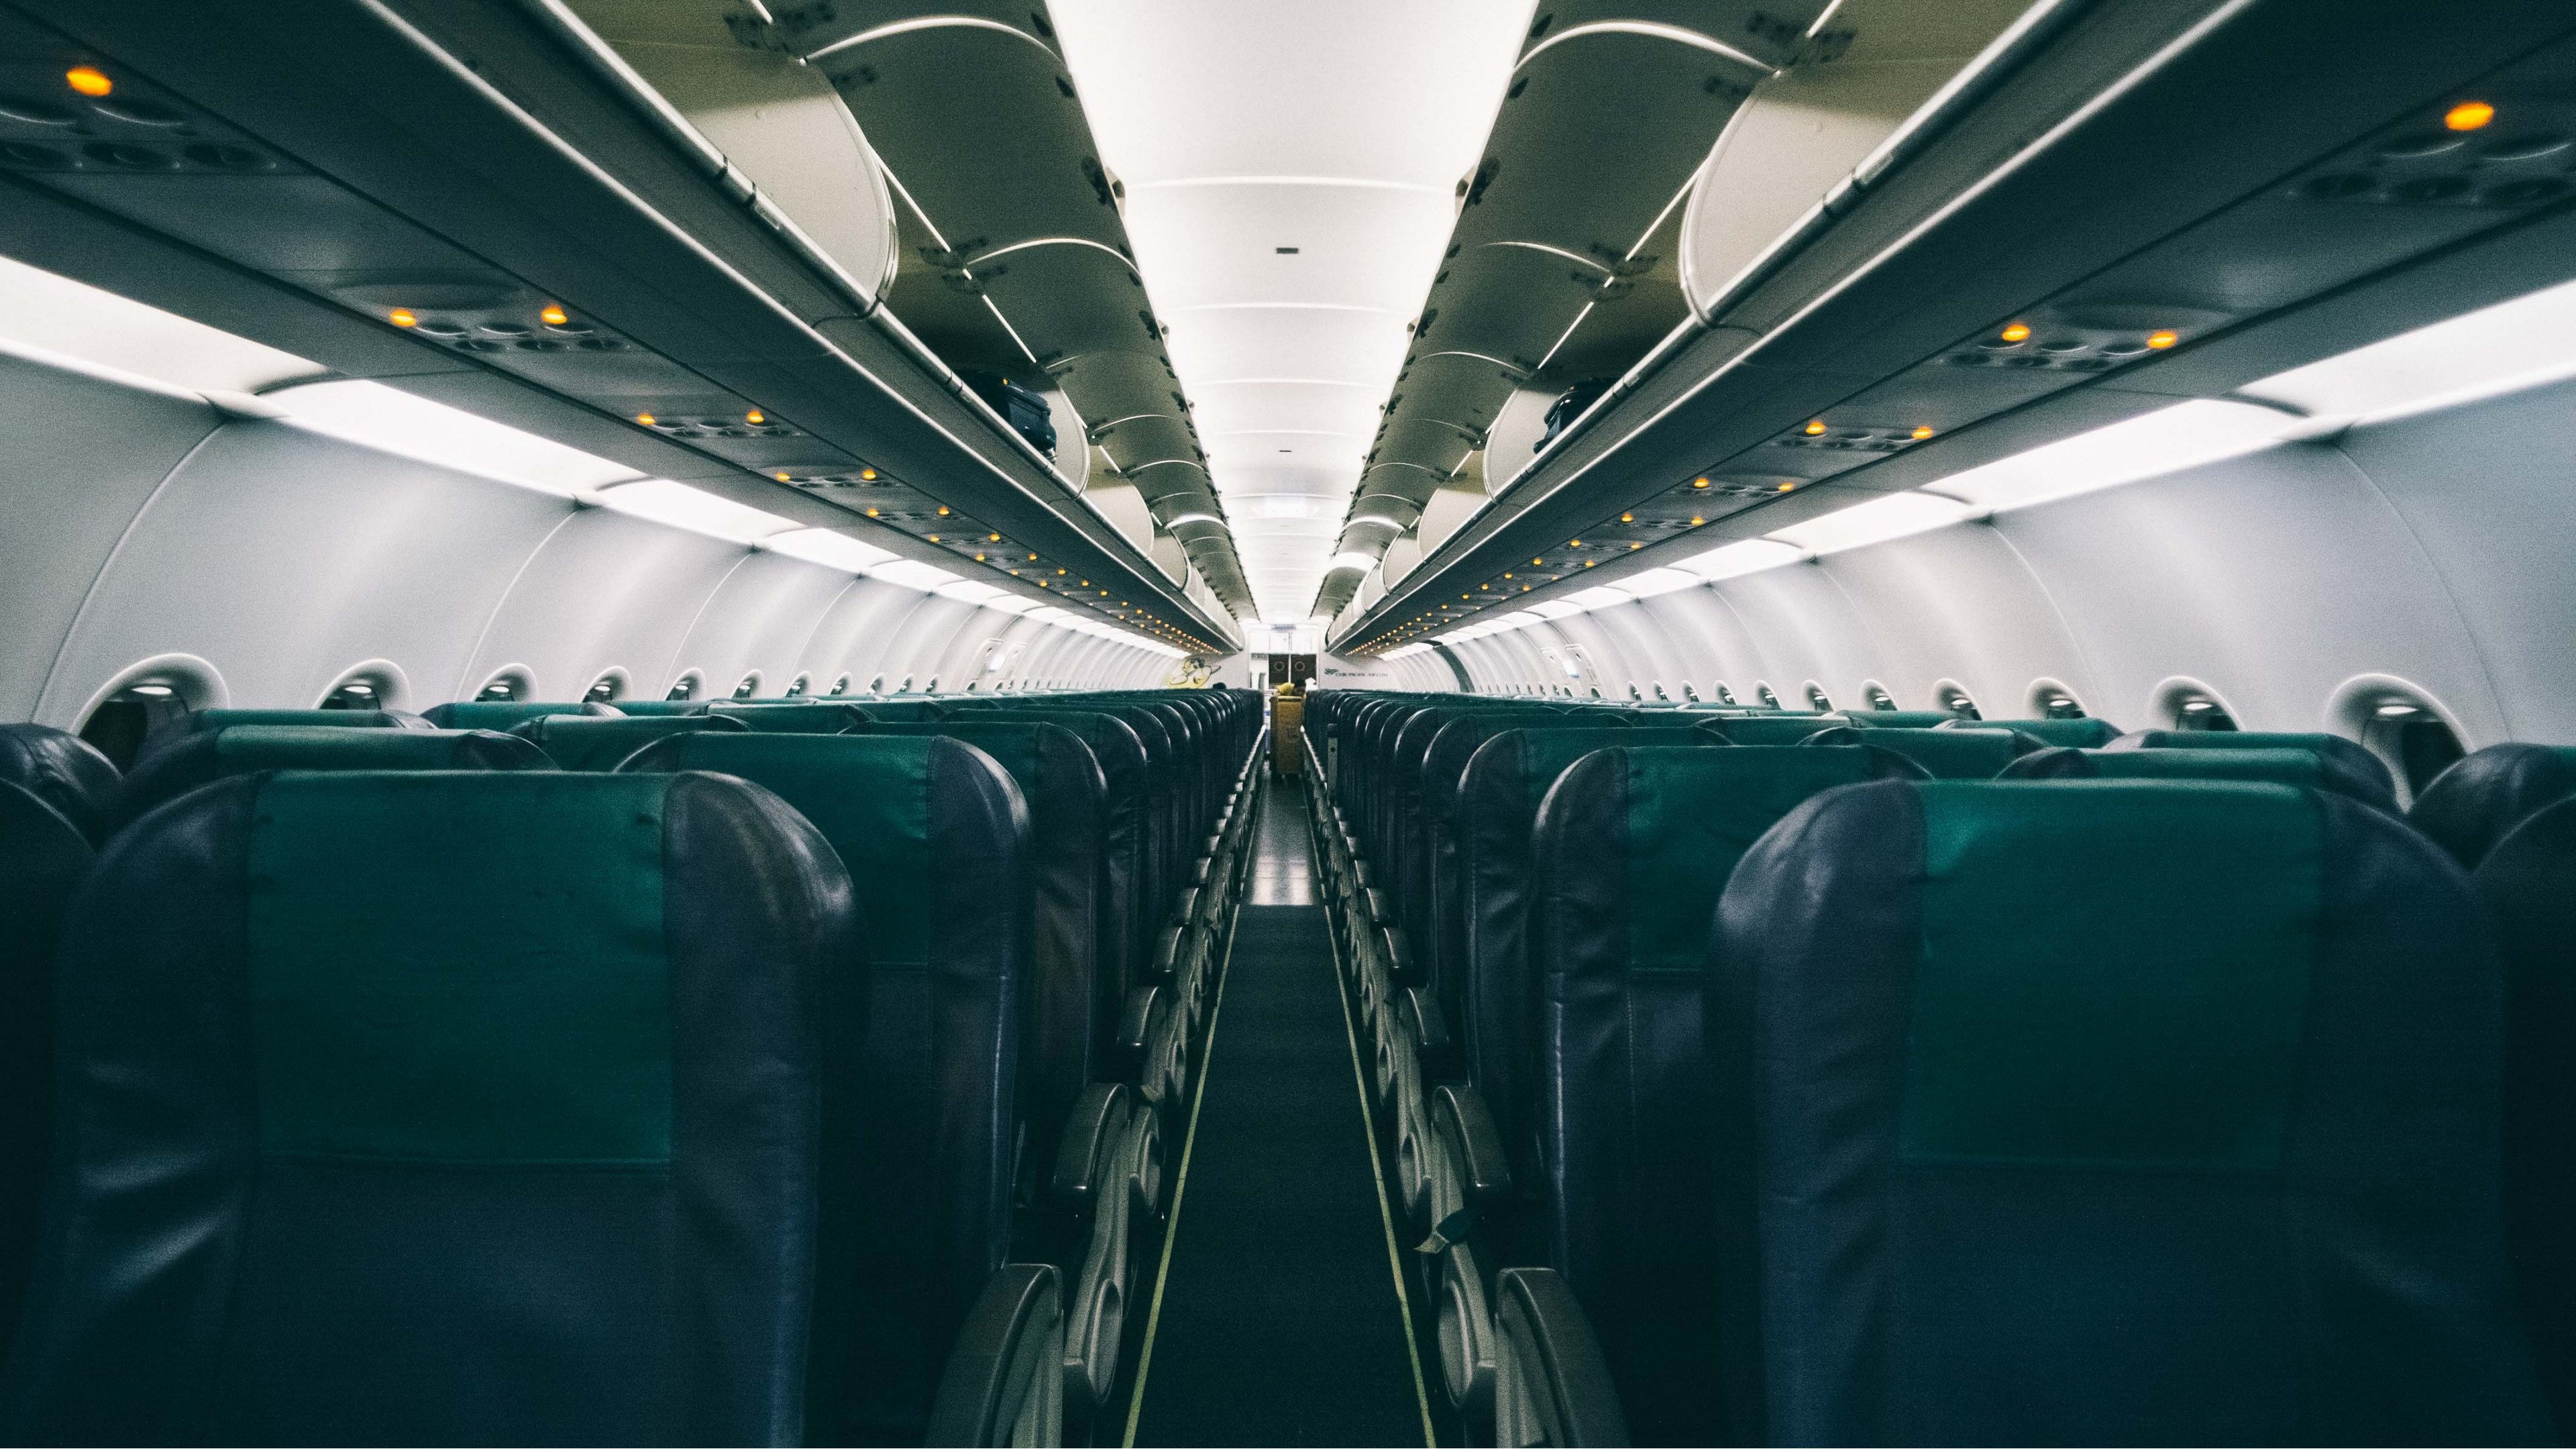 Wallpaper / seating seat airplane aisle and airplane interior HD 4k wallpaper free download